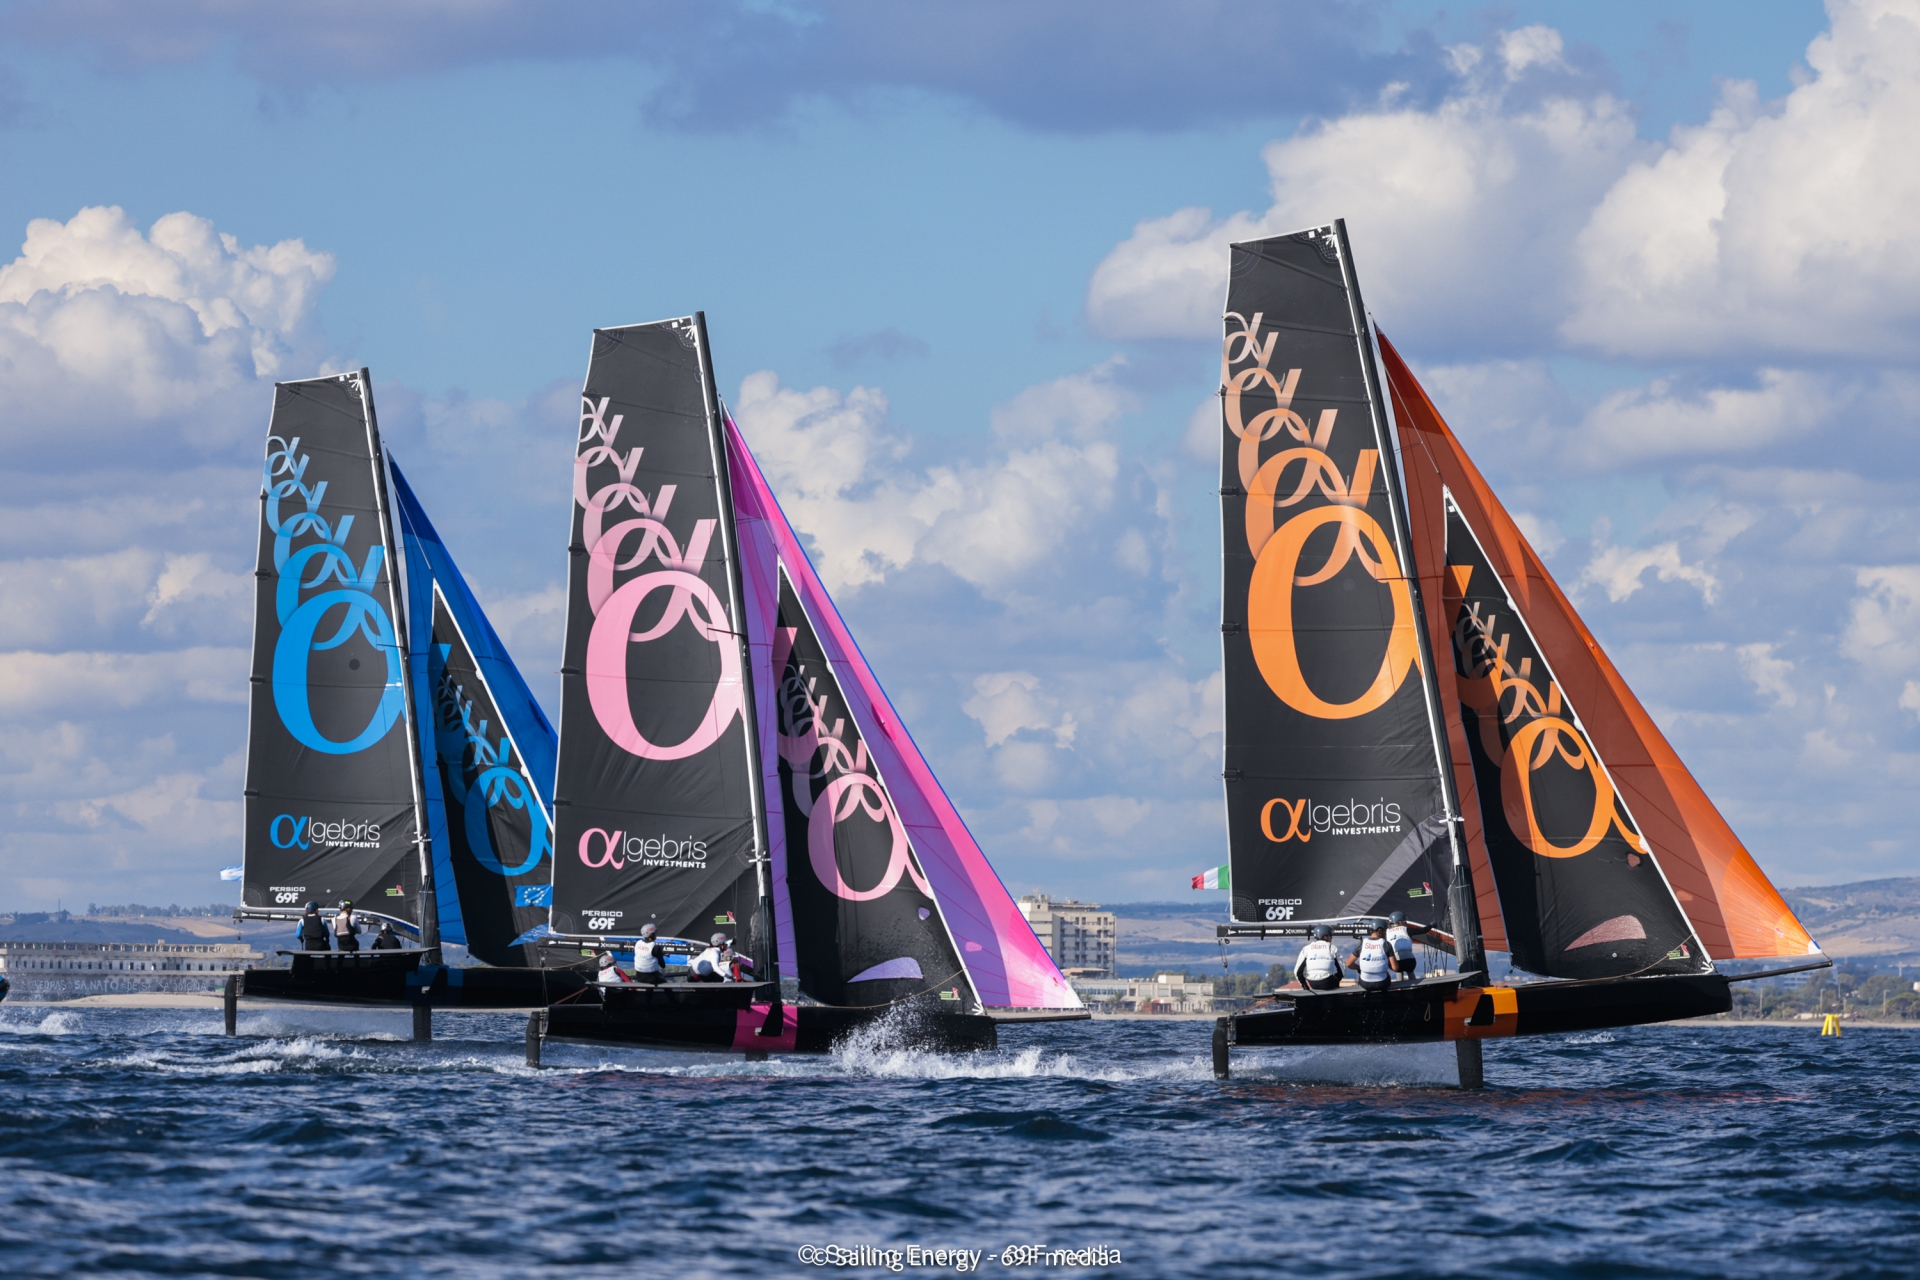 Youth Foiling Gold Cup Act 3, Young Azzurra vince i knock out e vola in finale - News - Yacht Club Costa Smeralda